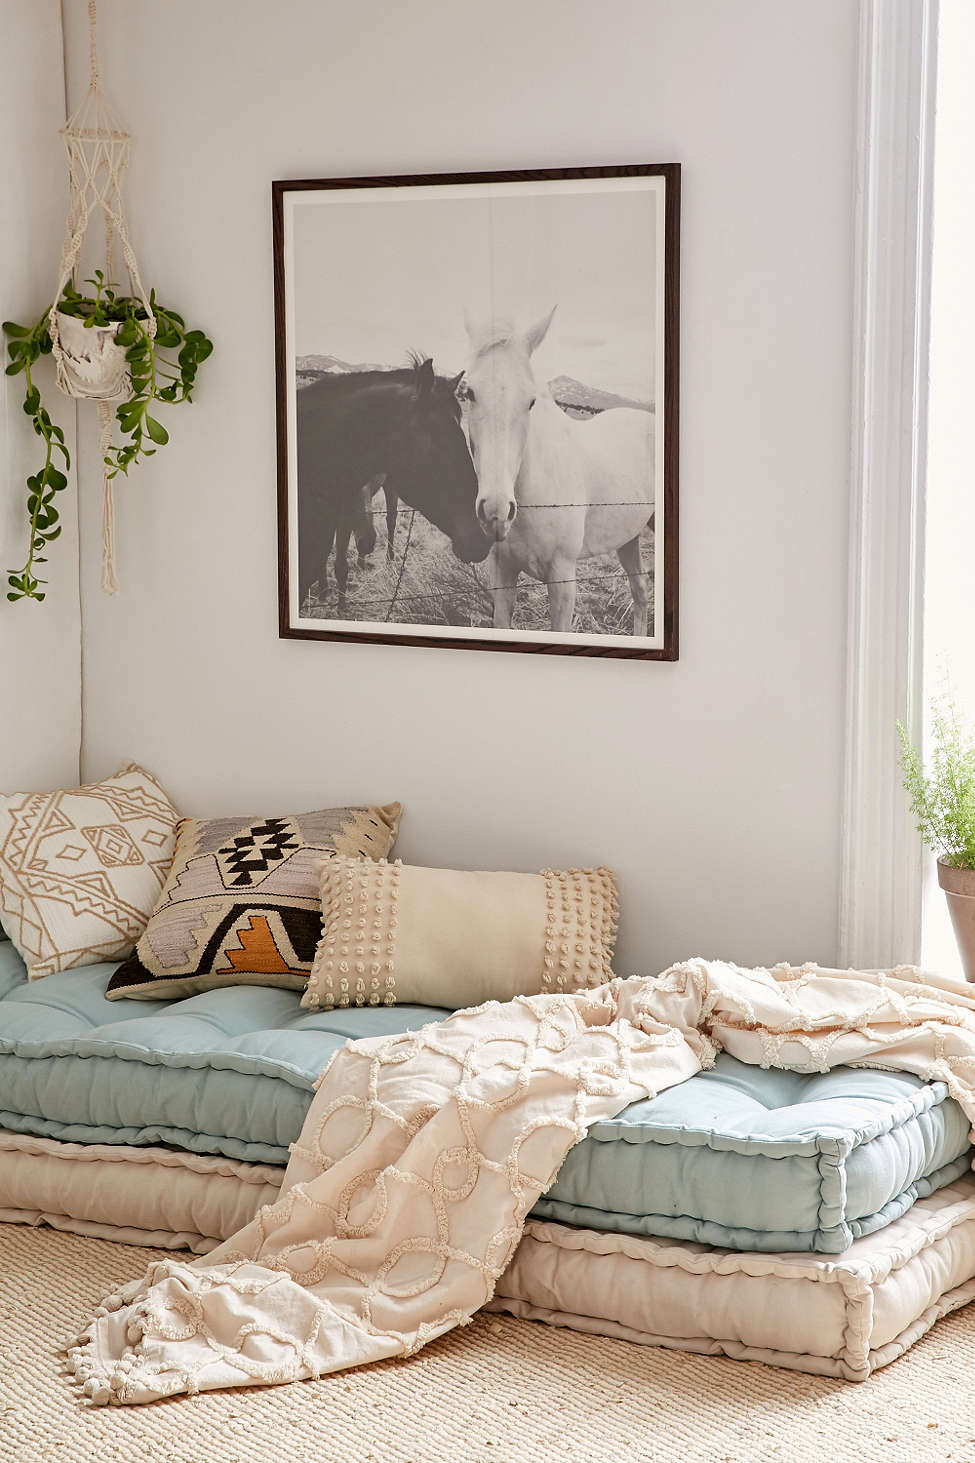 selinesteba.com - Daybed_Urban outfitters_rohini daybed cushion.jpeg